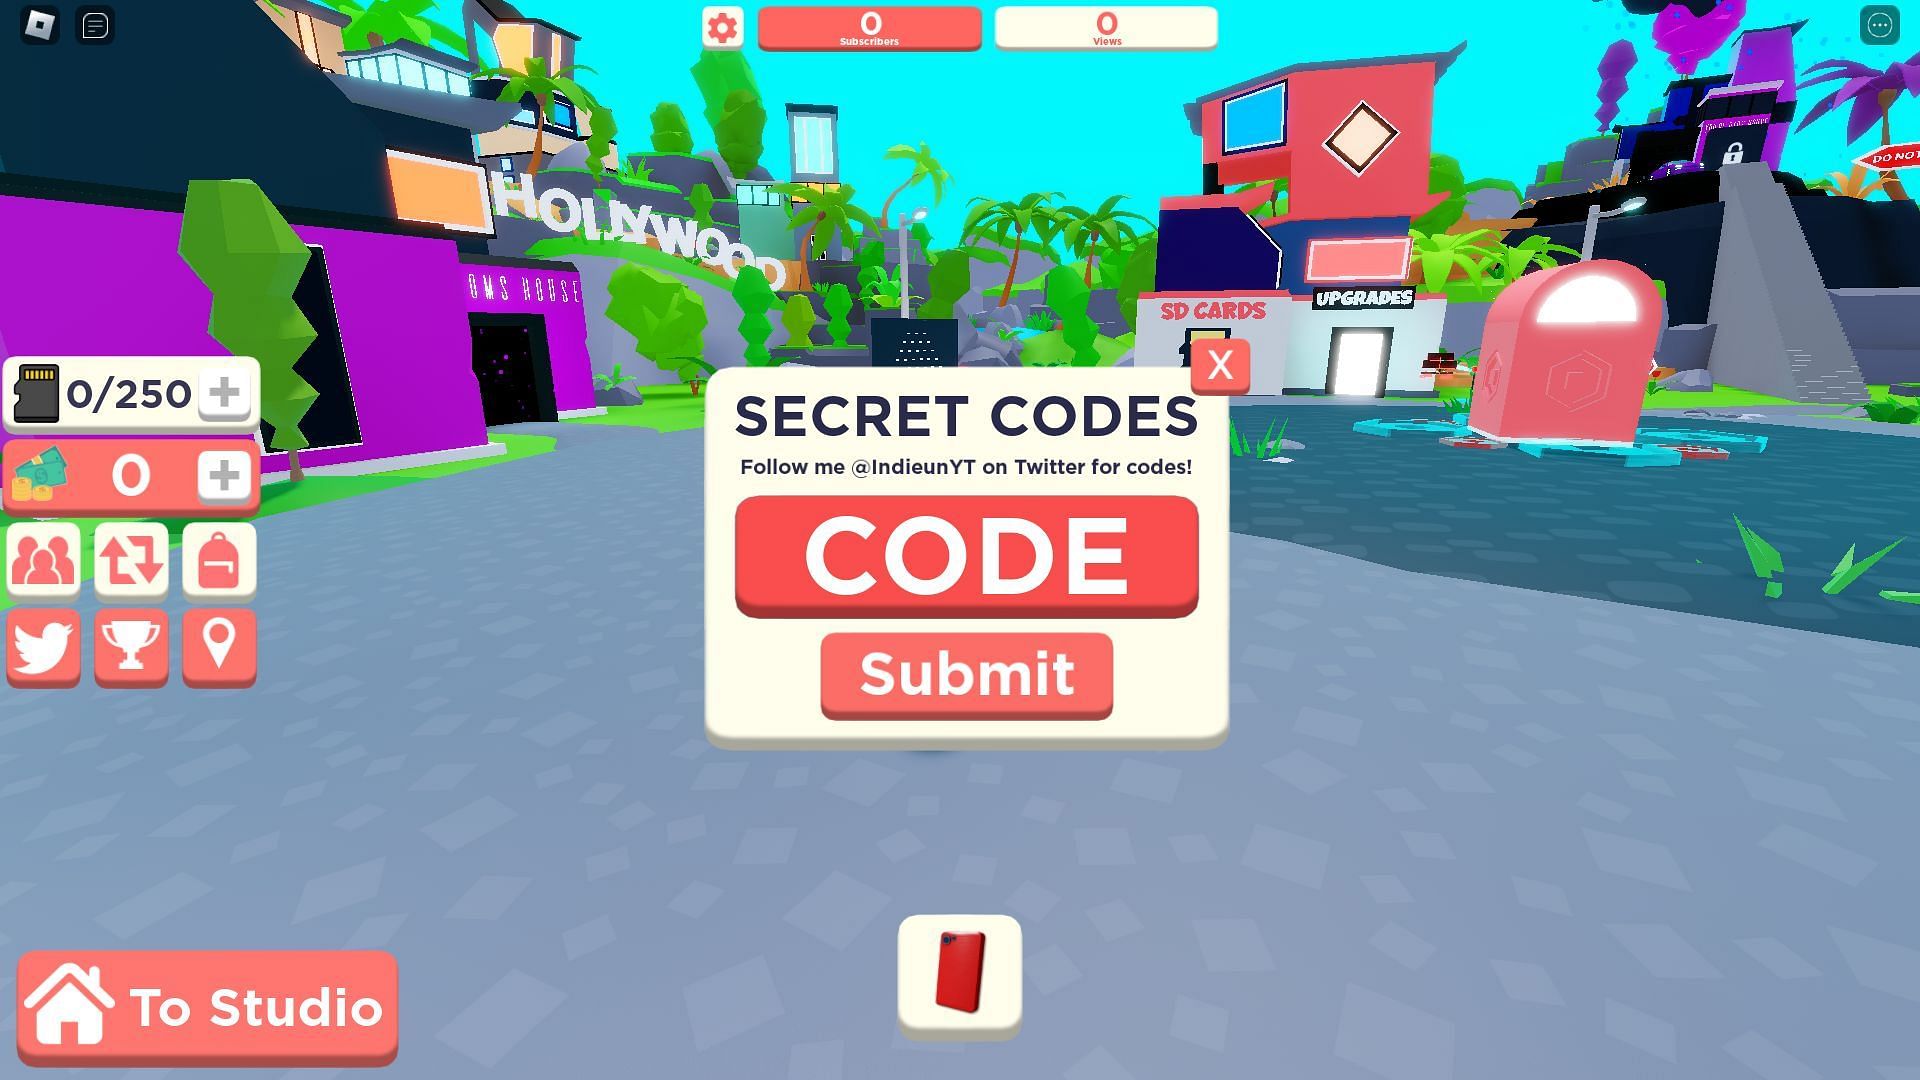 Troubleshooting codes for YouTube Simulator (Image via Roblox)